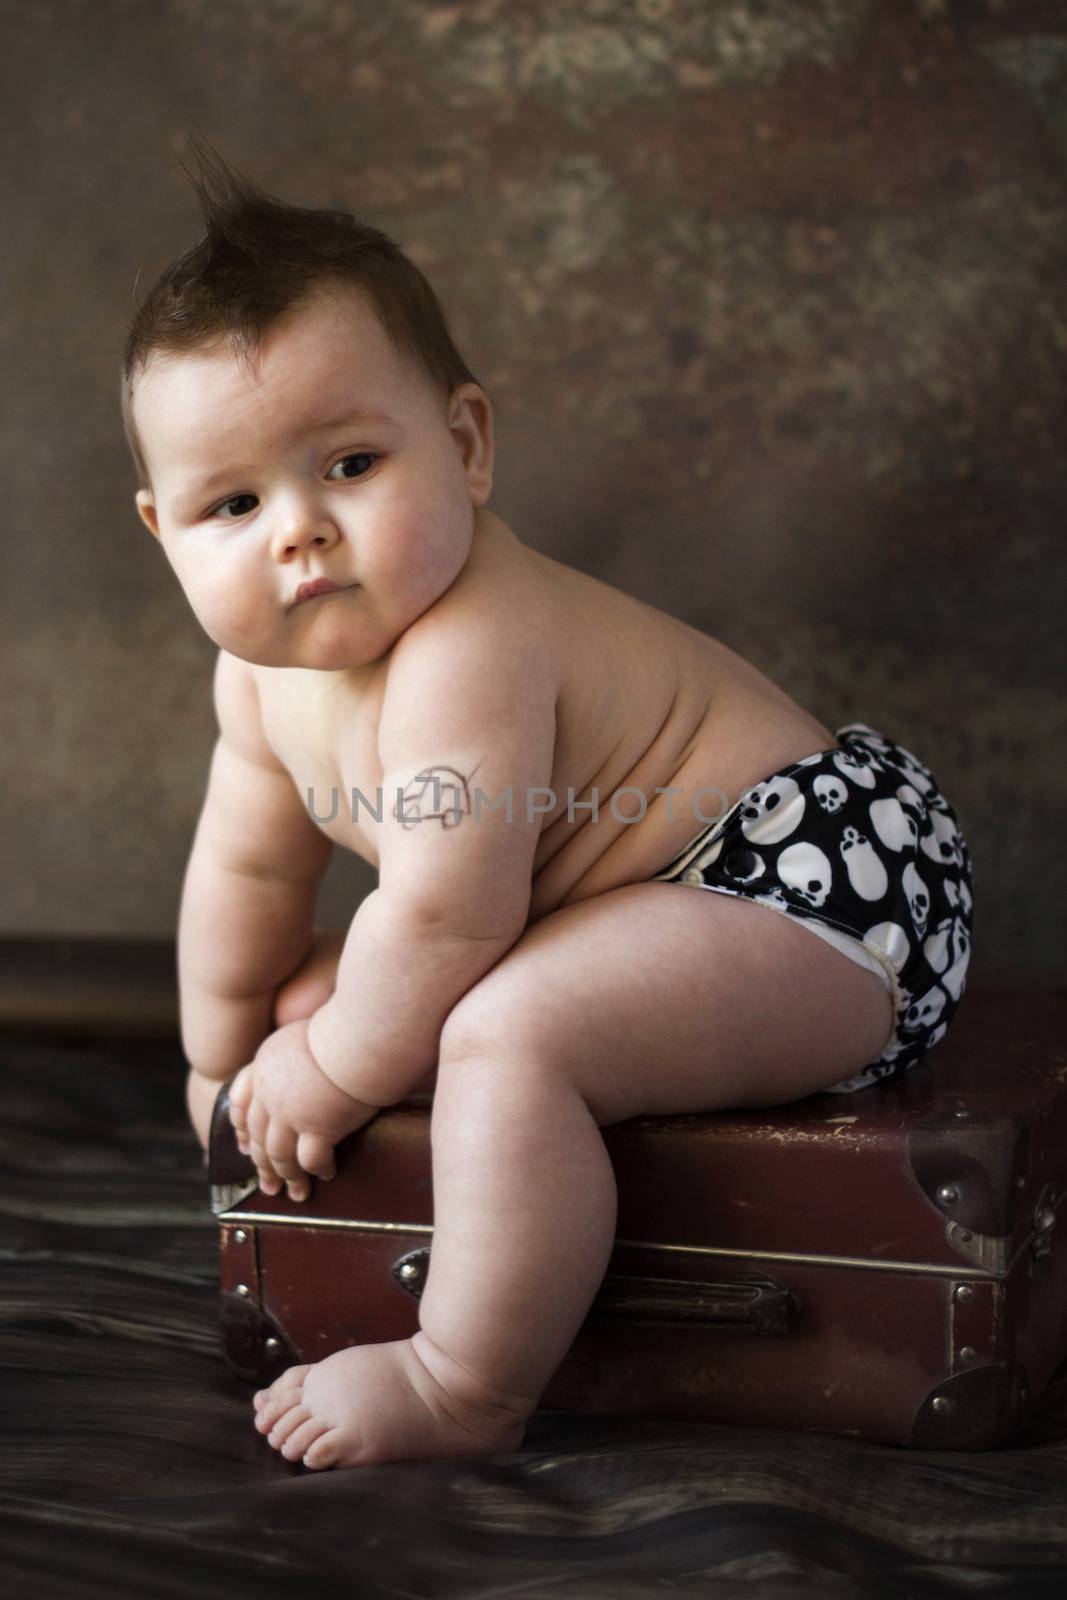 small boy sitting on suitcase